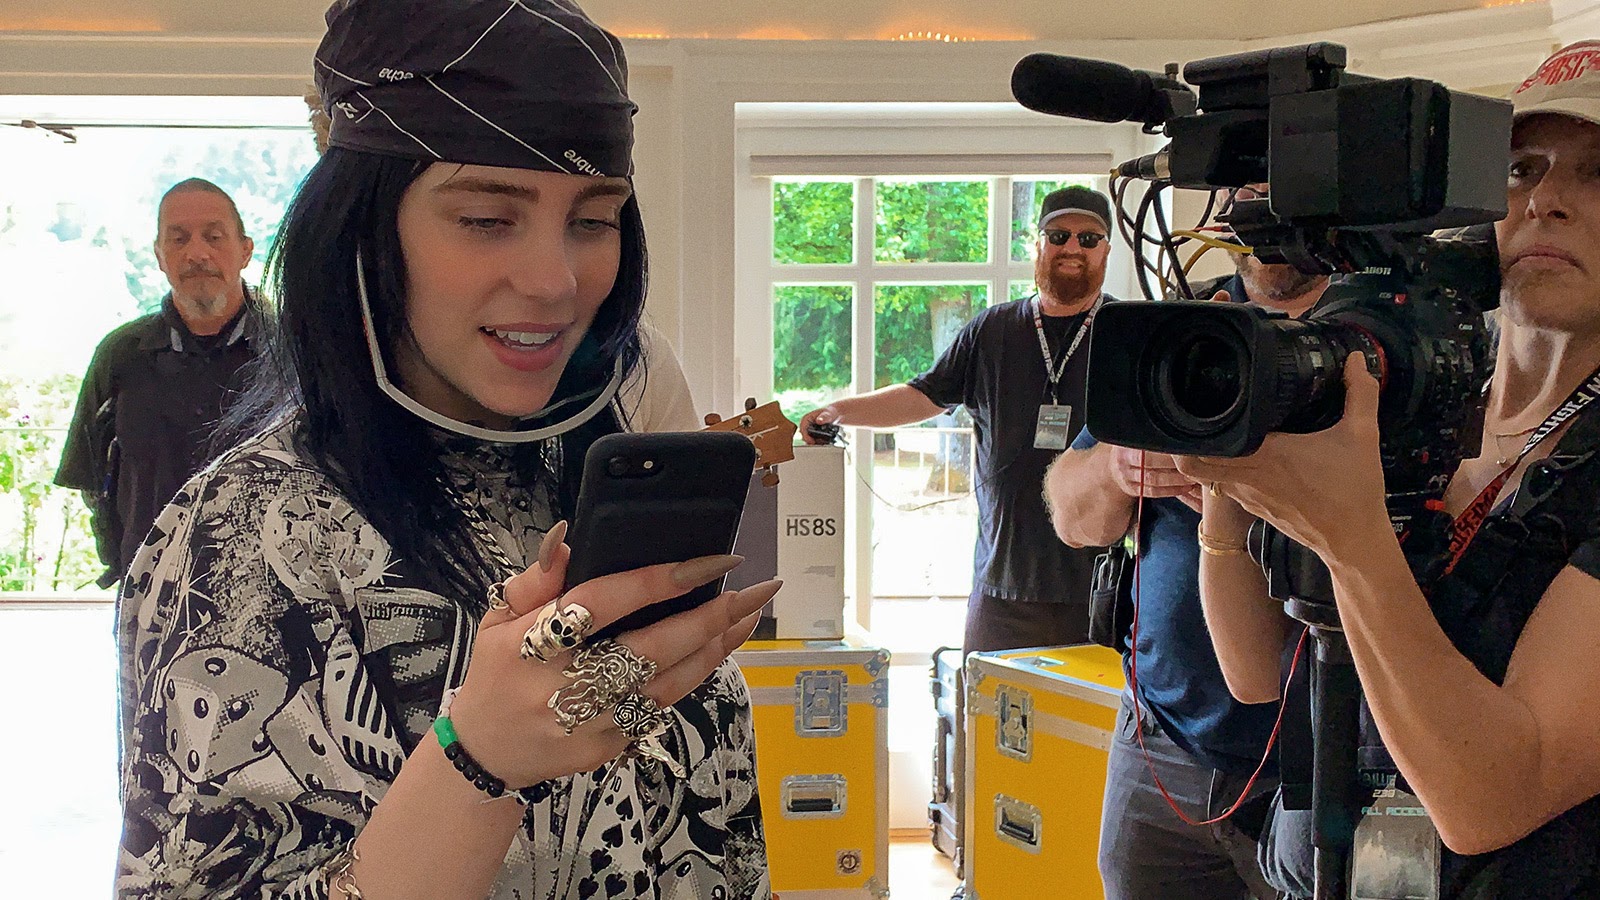 Billie Eilish checks her phone while DP Jenna Rosher films with a Canon C300 Mk II